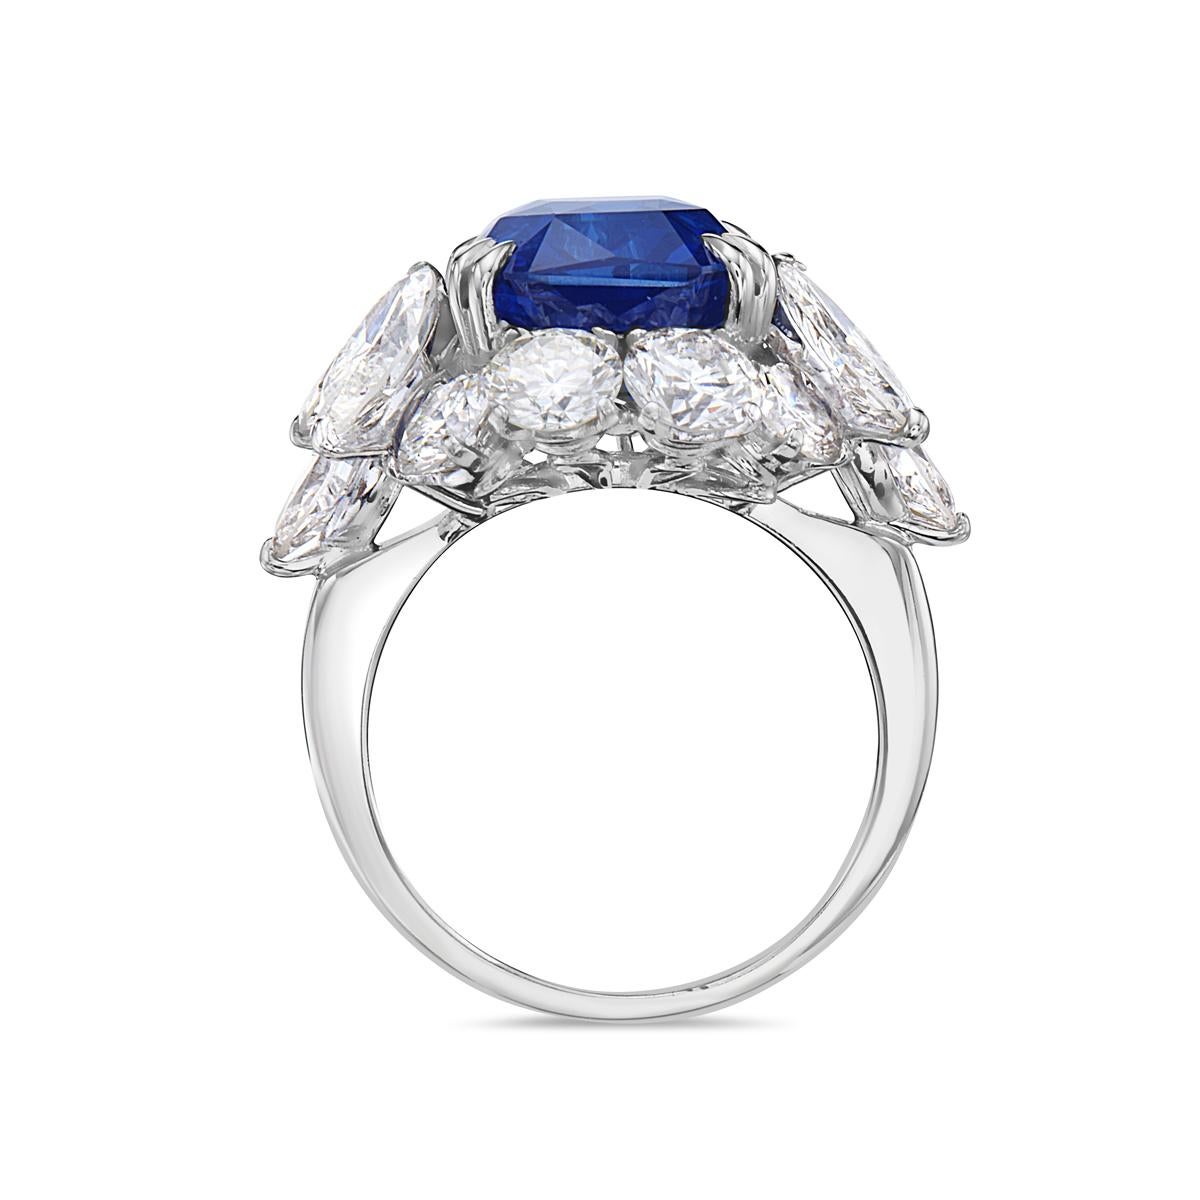 This cocktail ring features a 10.73 GRS certified vivid royal blue Madagascar heat modified octagonal radiant step cut sapphire, 8 round brilliant diamonds, and 6 Marquise diamonds set in 18K white gold. Size 6.

Resizeable upon request.

Viewings